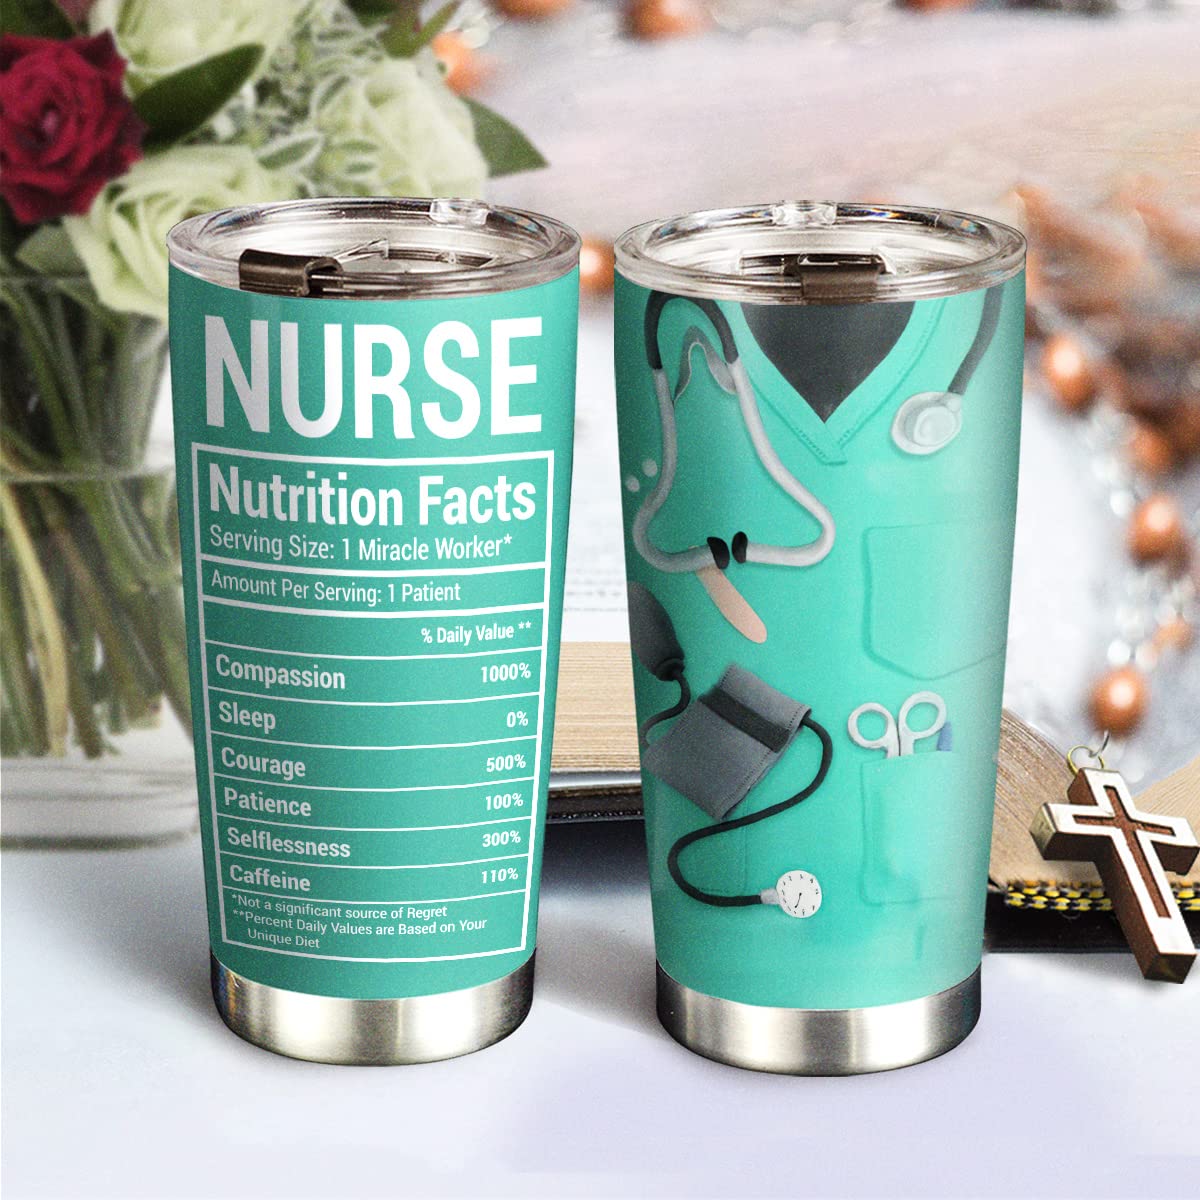 64HYDRO 20oz Nurse Gifts for Women, Men, Nurse Practitioner Gifts, Nurse Appreciation Gifts Nurse Nutrition Facts Tumbler Cup with Lid, Double Wall Vacuum Insulated Travel Coffee Mug